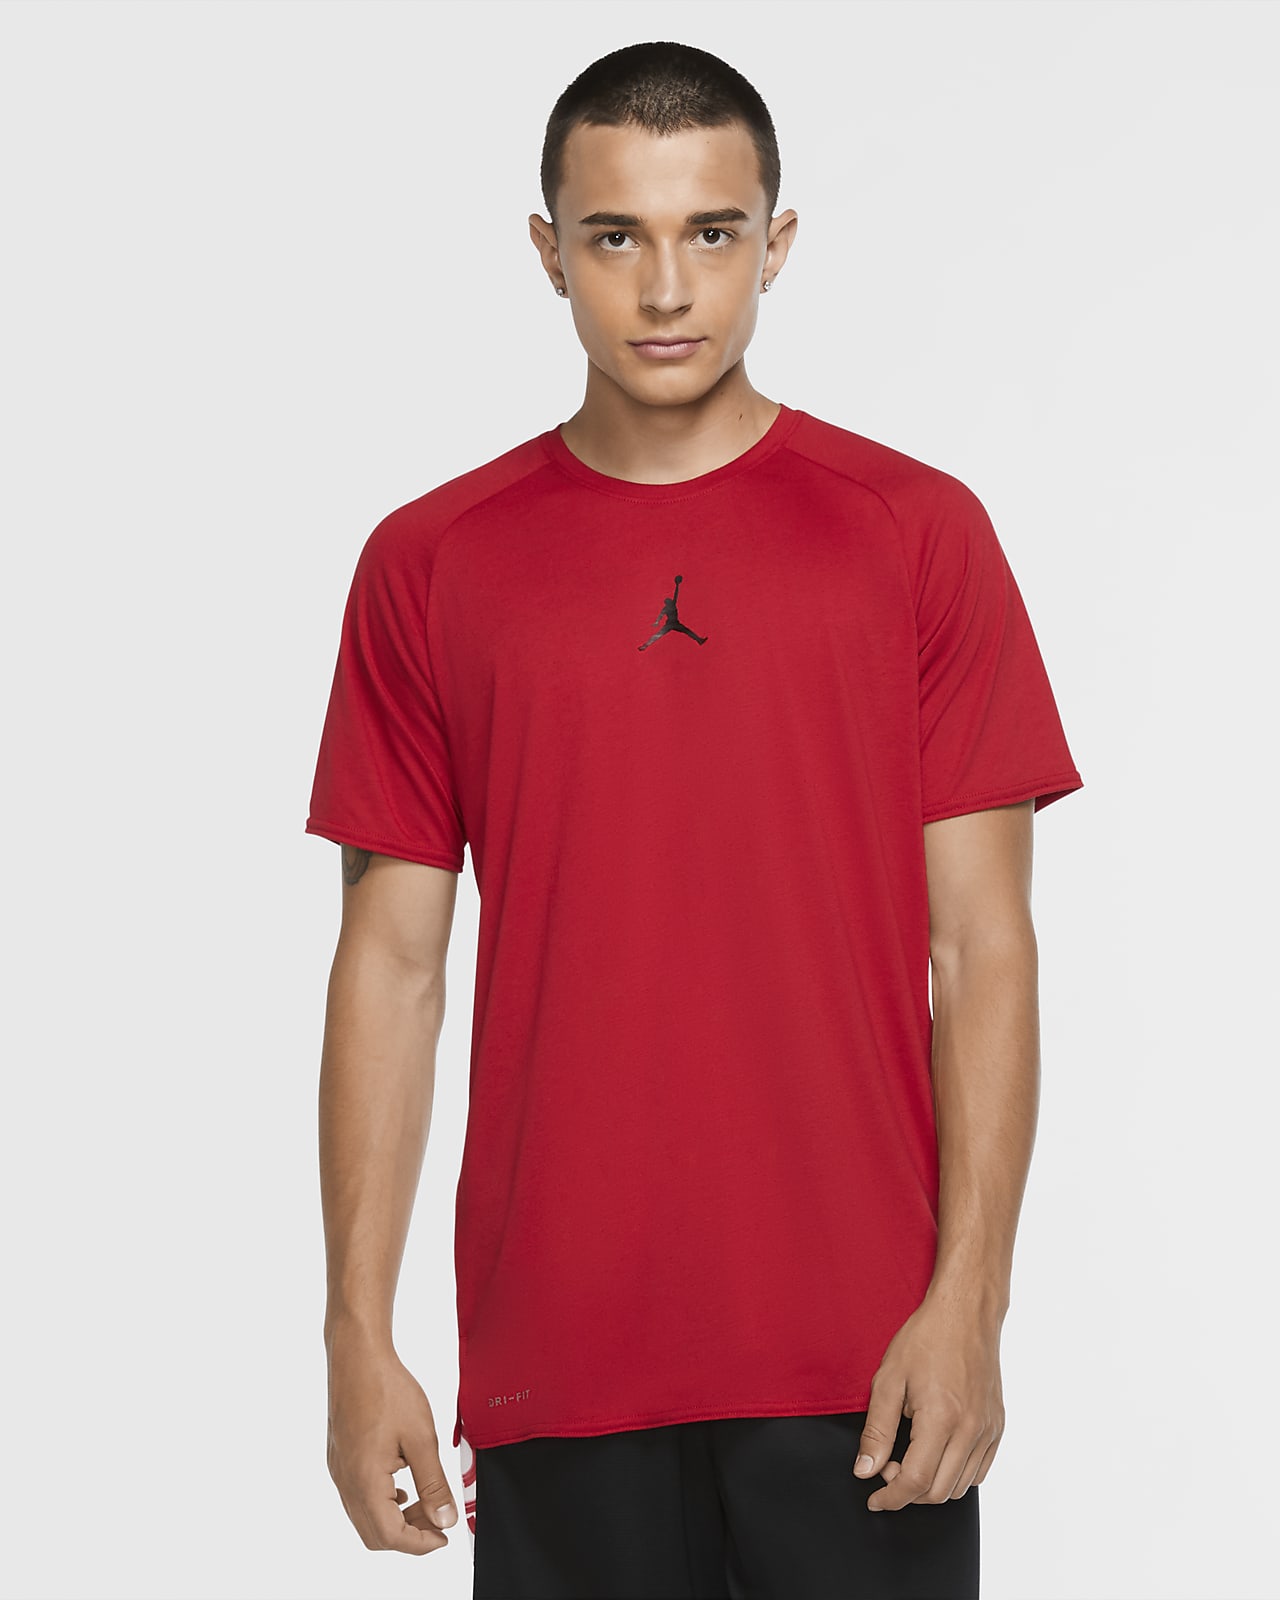 nike red training top